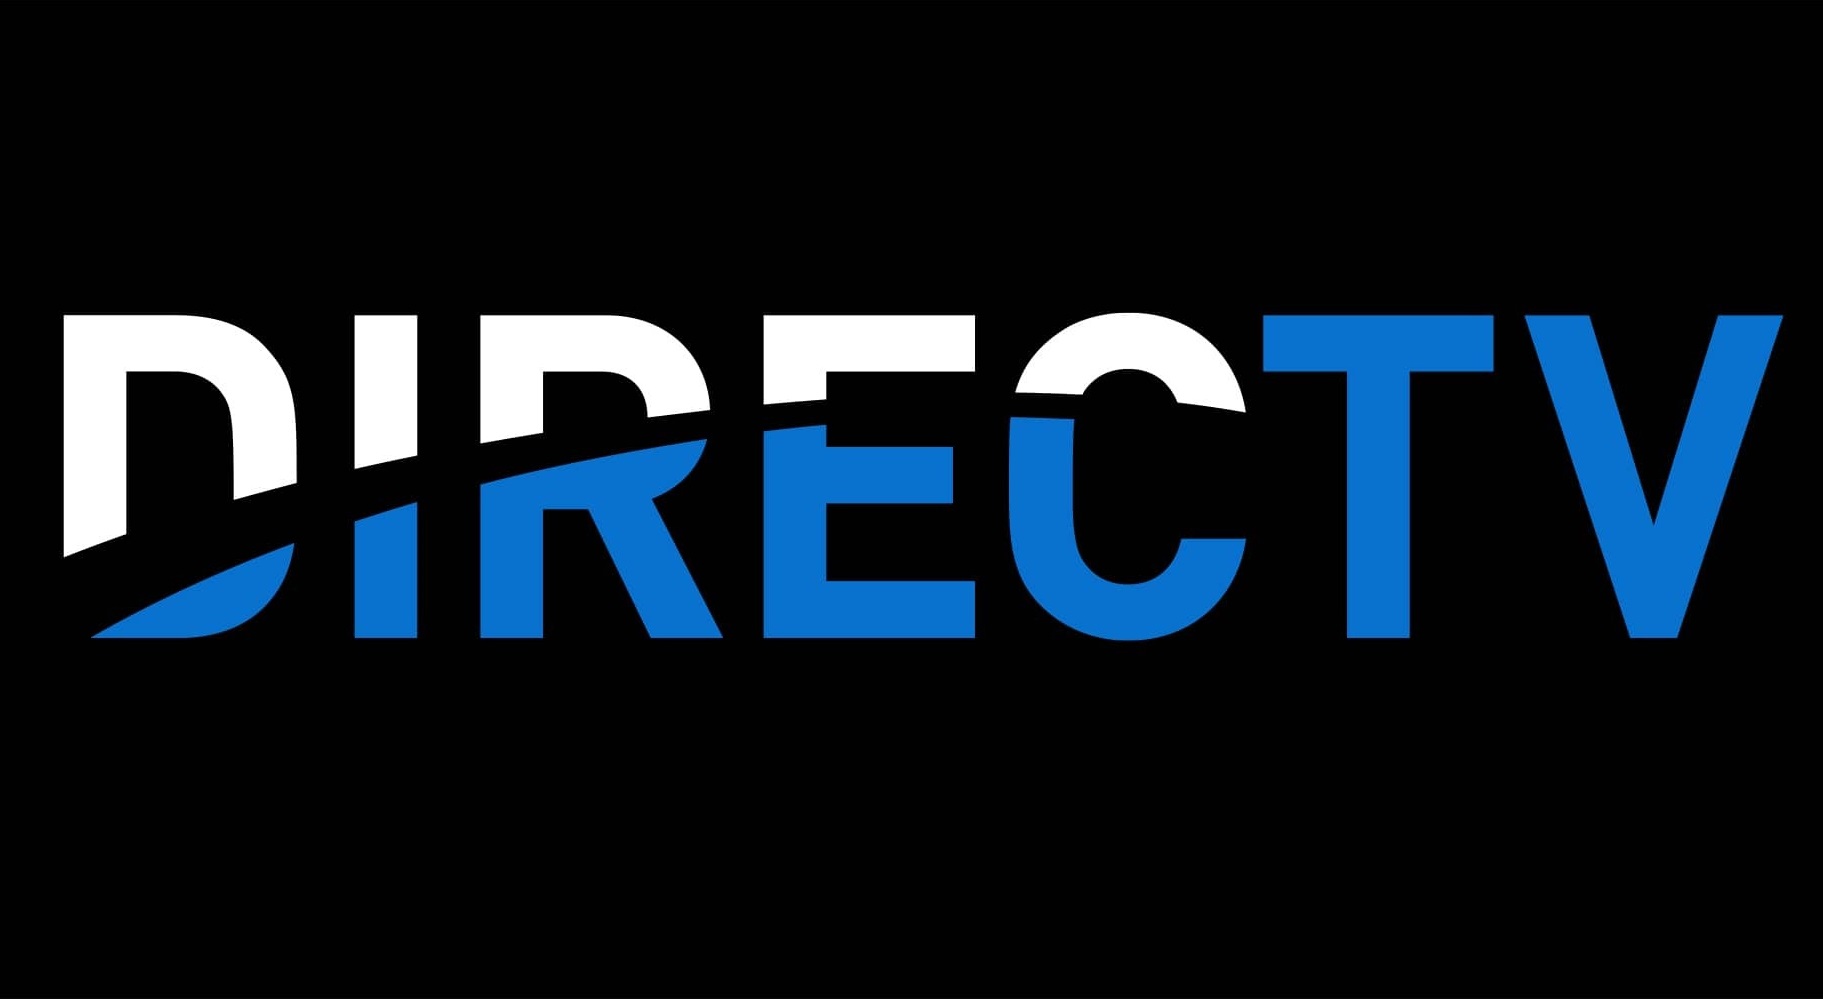 If you have DirecTV, you’re about to lose these 2 channels